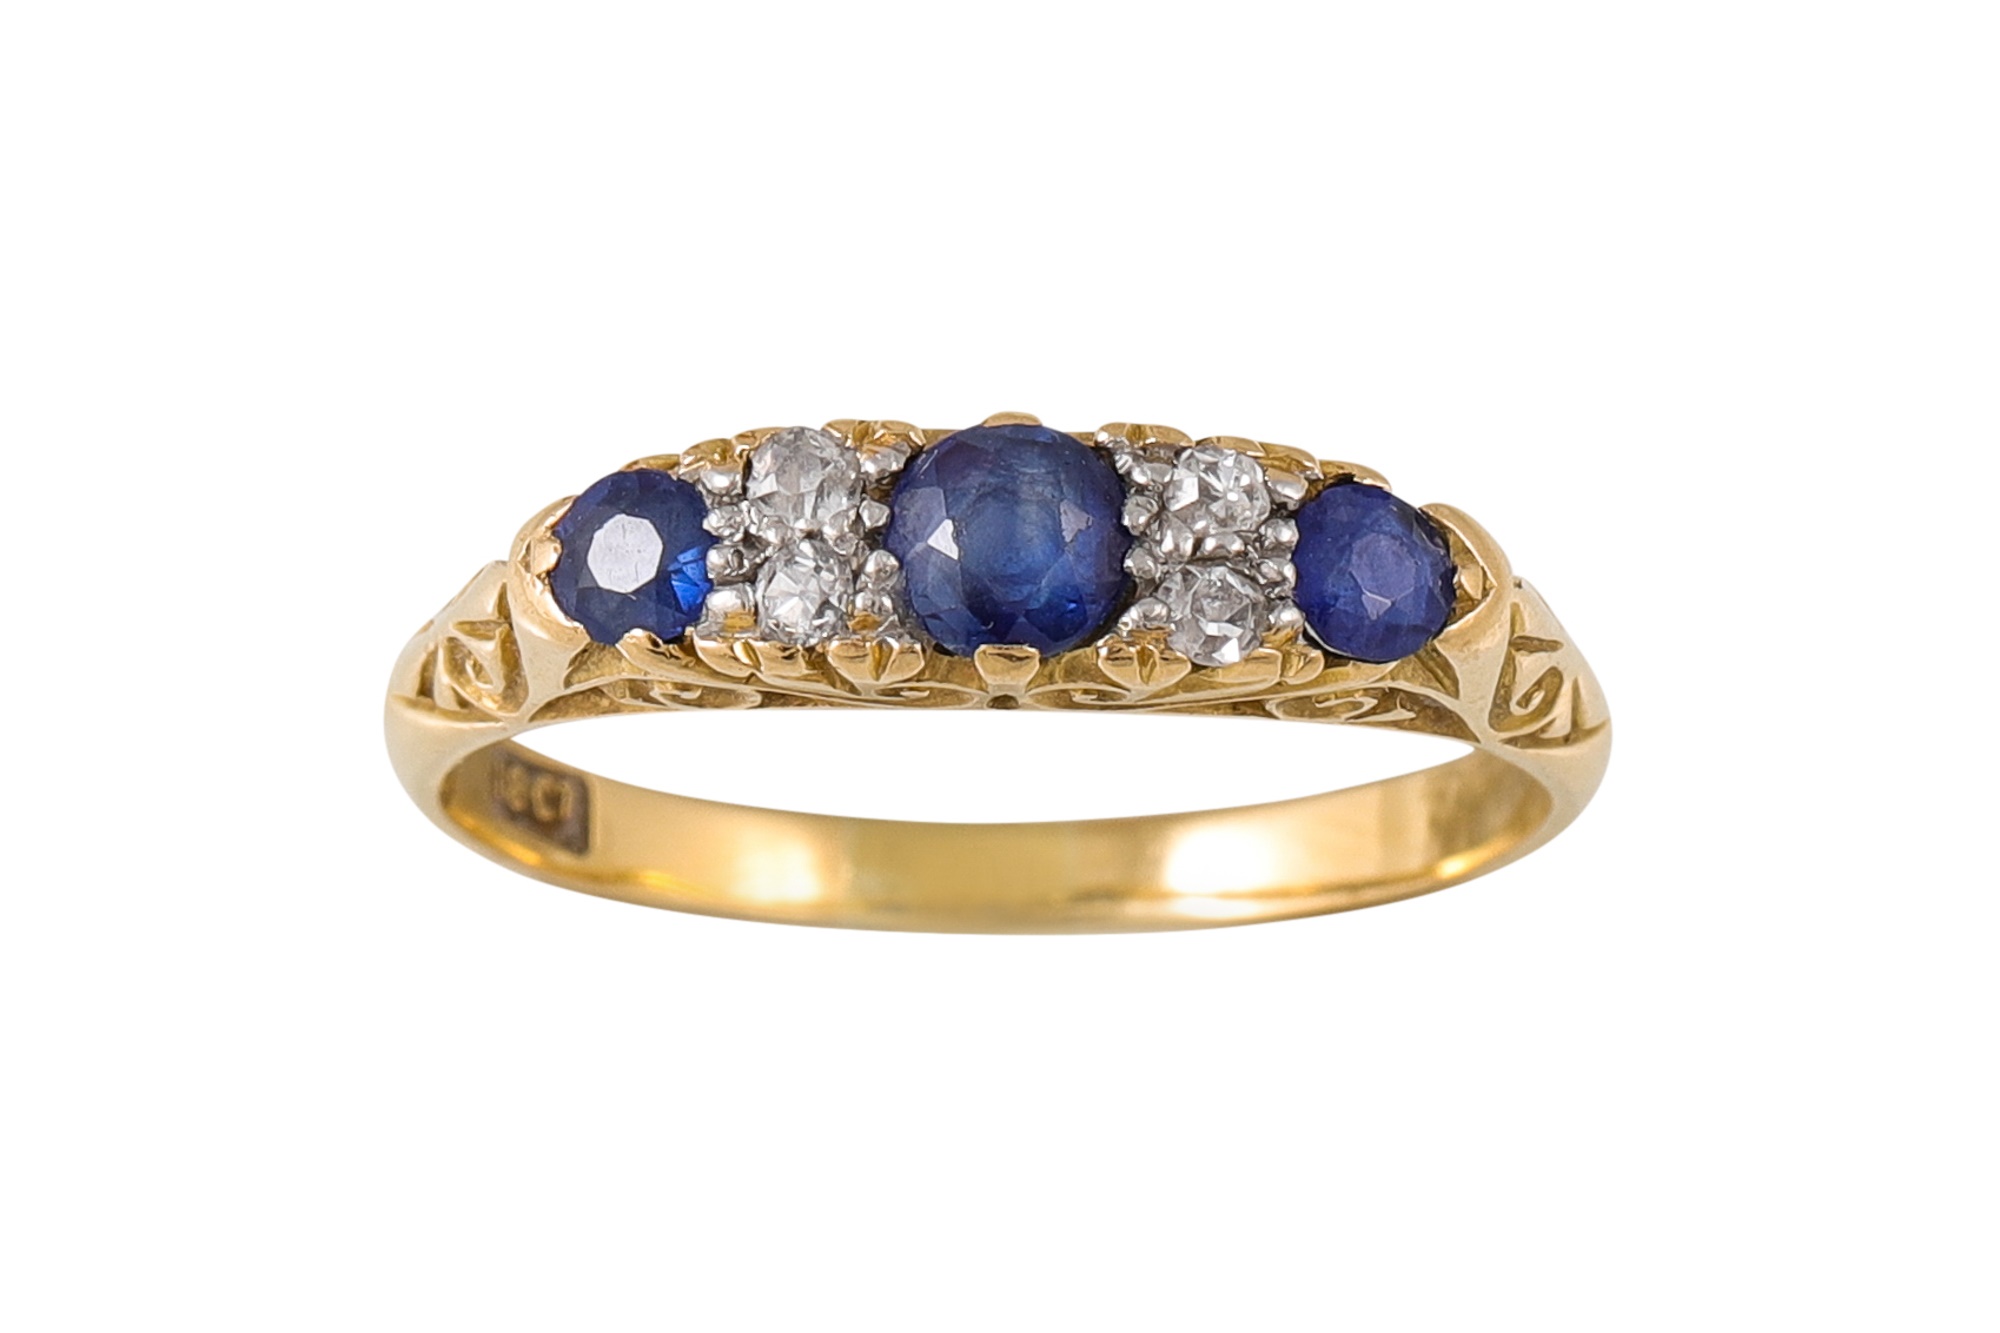 AN ANTIQUE DIAMOND AND SAPPHIRE RING